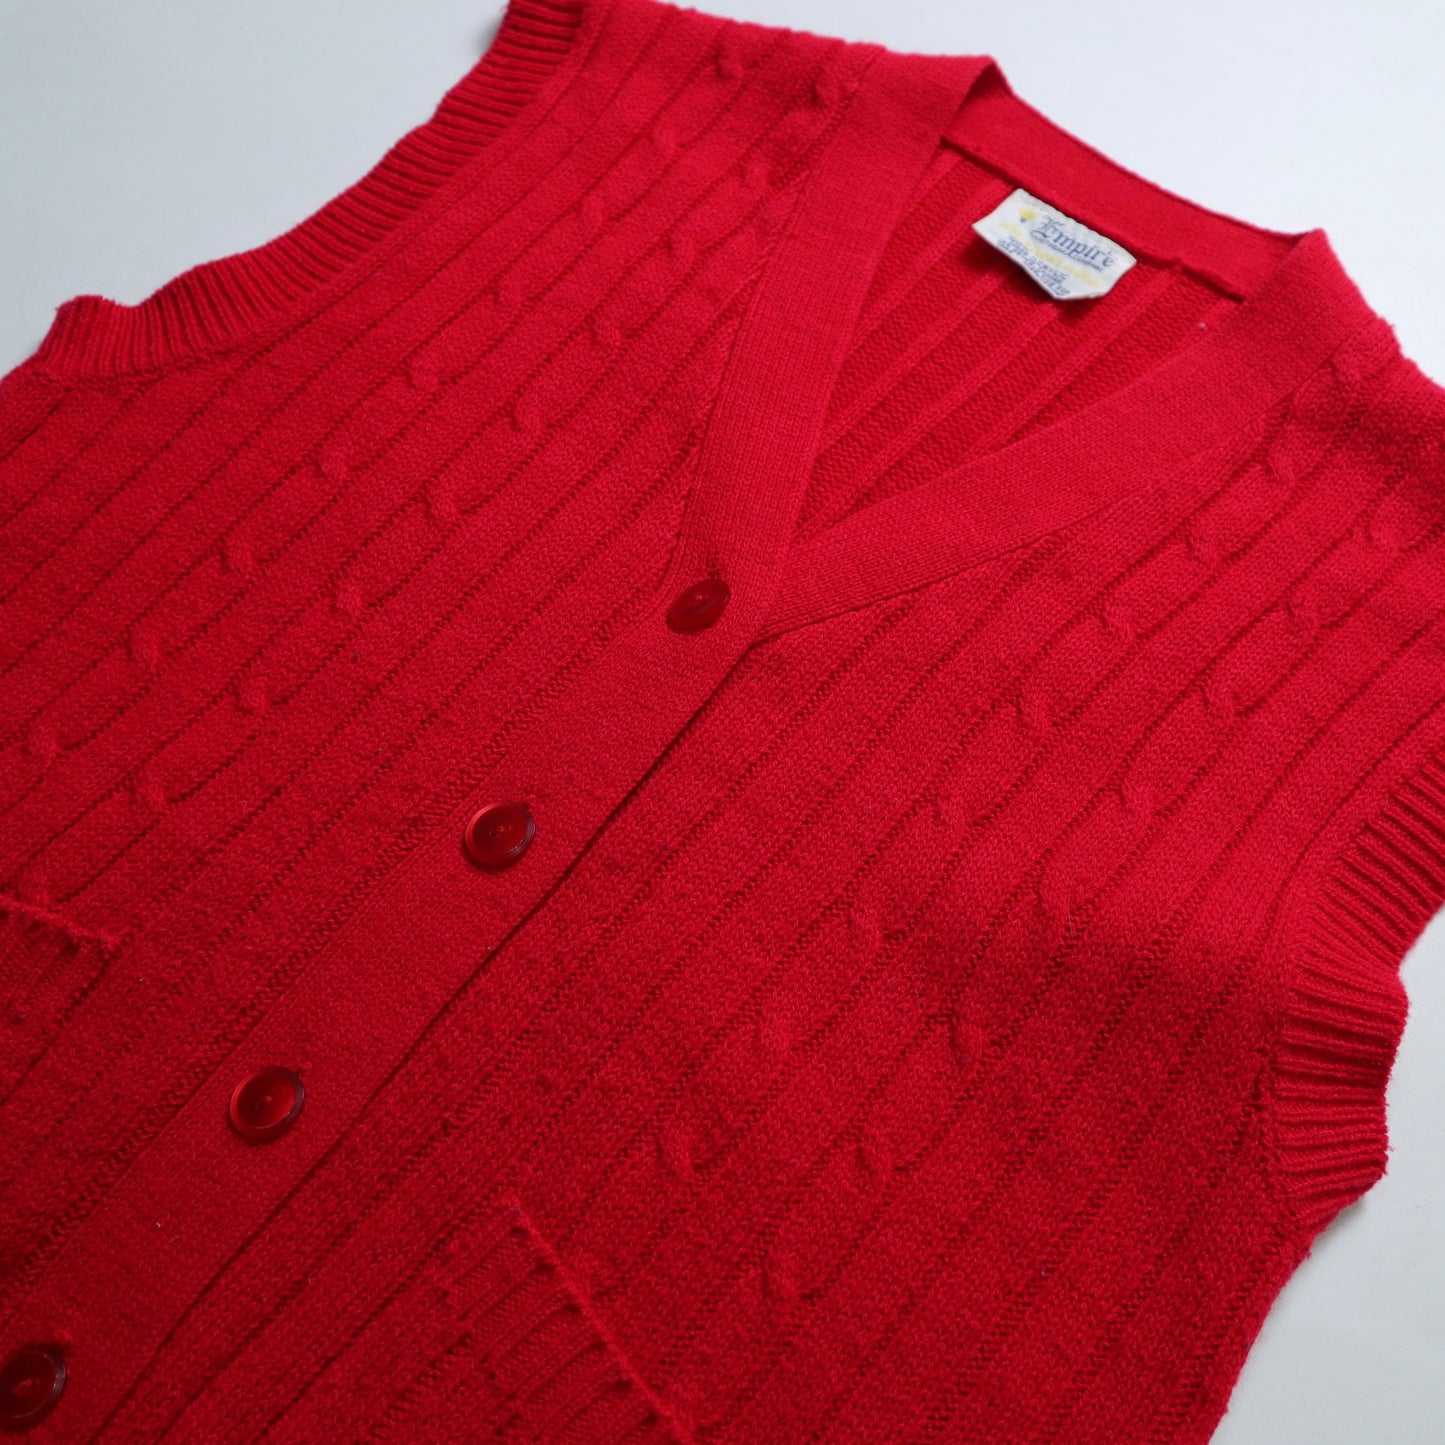 70's red hemp rope knitted vest plain breasted vest made in Taiwan